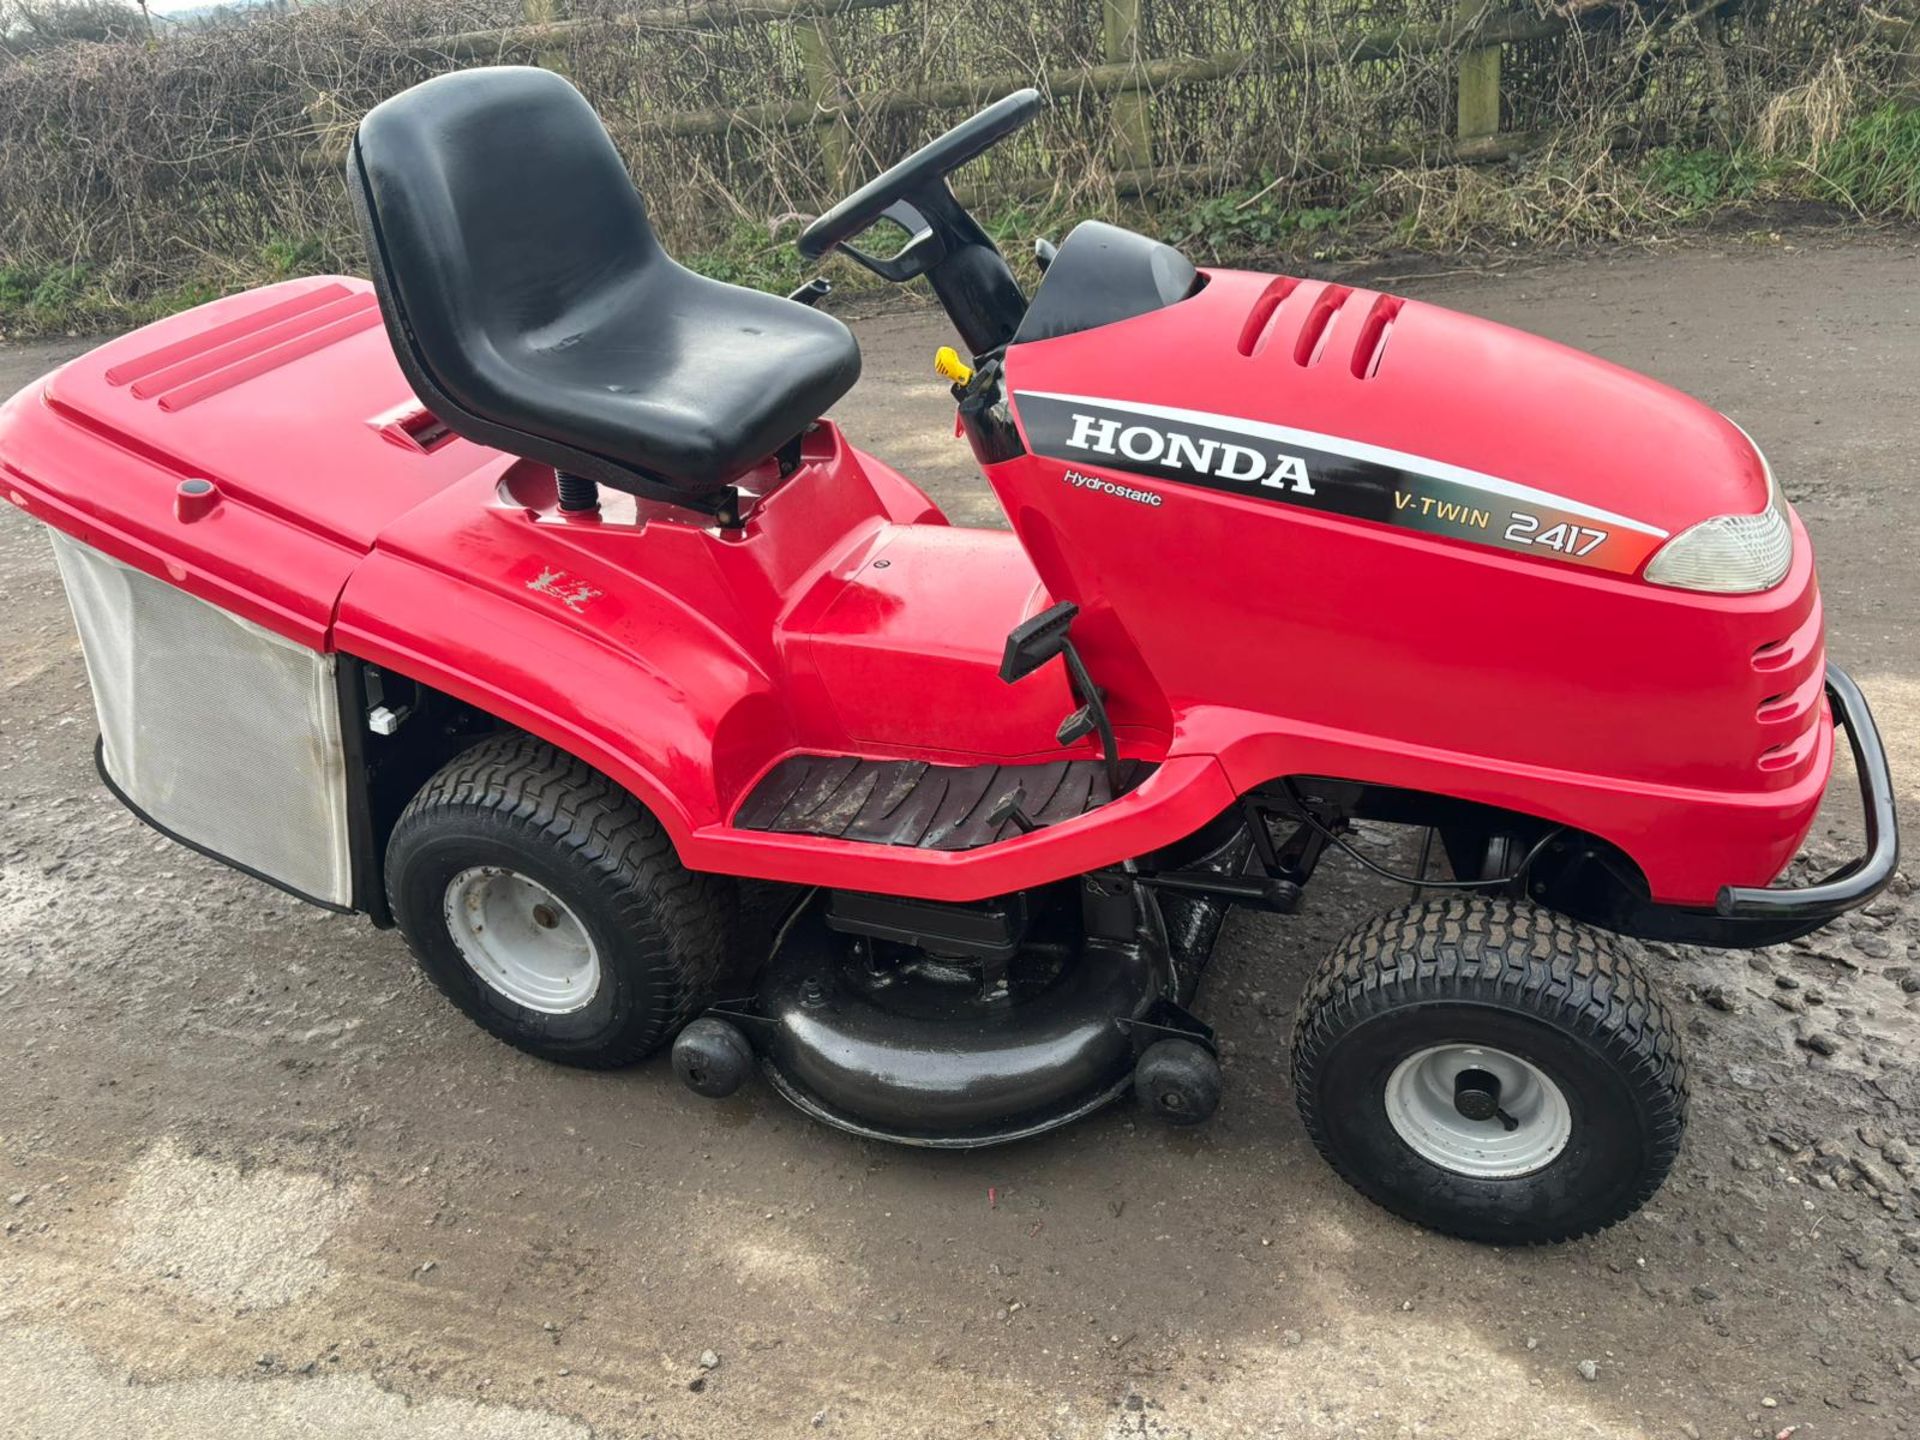 HONDA 2417 RIDE ON MOWER WITH REAR COLLECTOR *PLUS VAT*